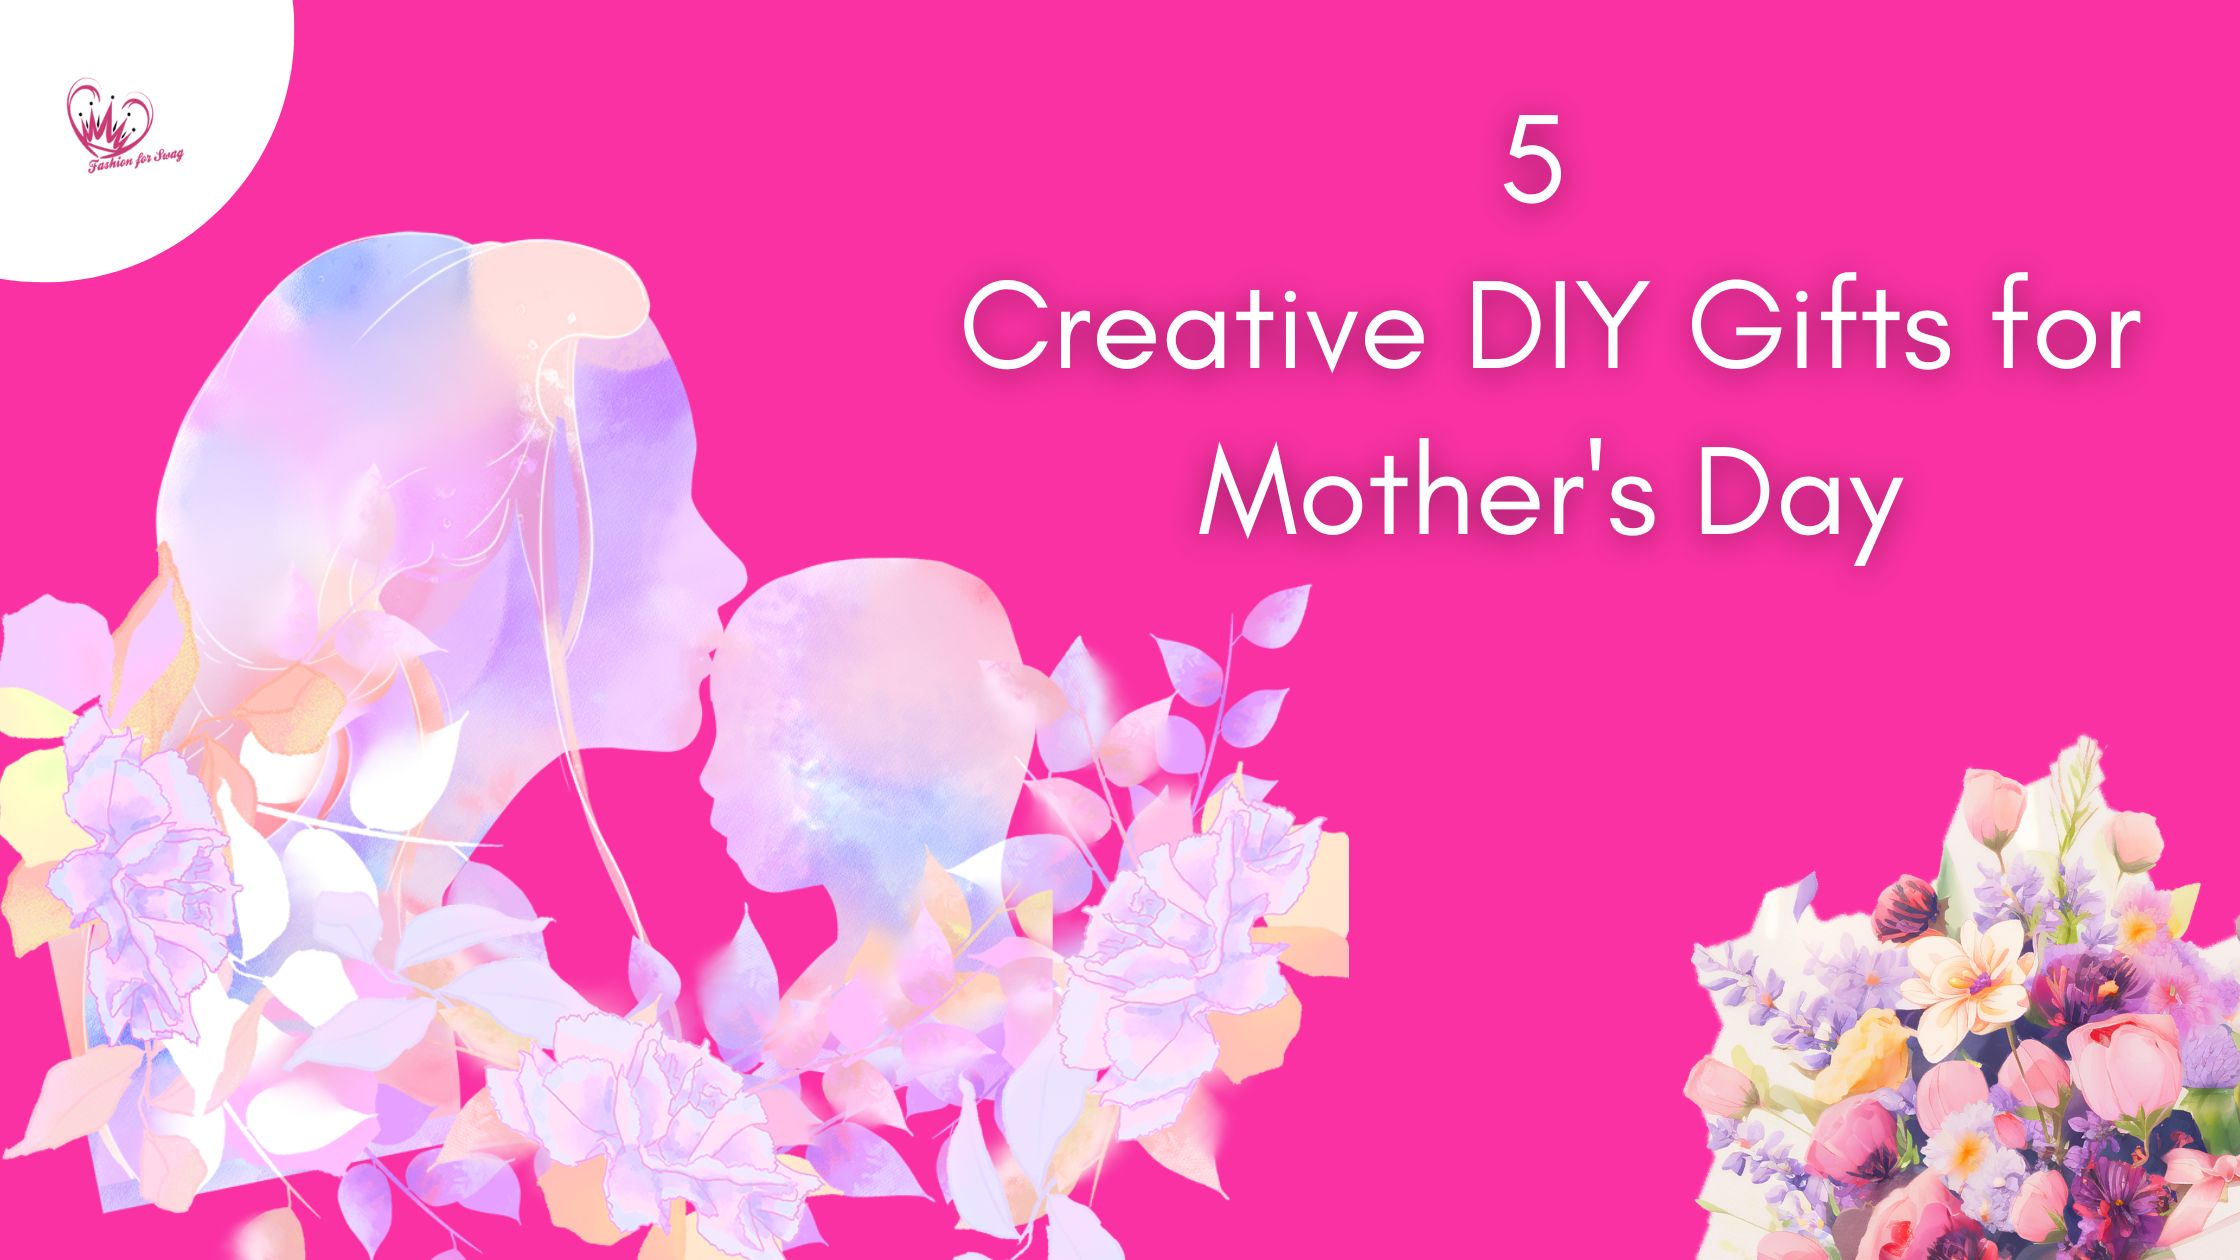 5 Creative DIY Gifts for Mother’s Day